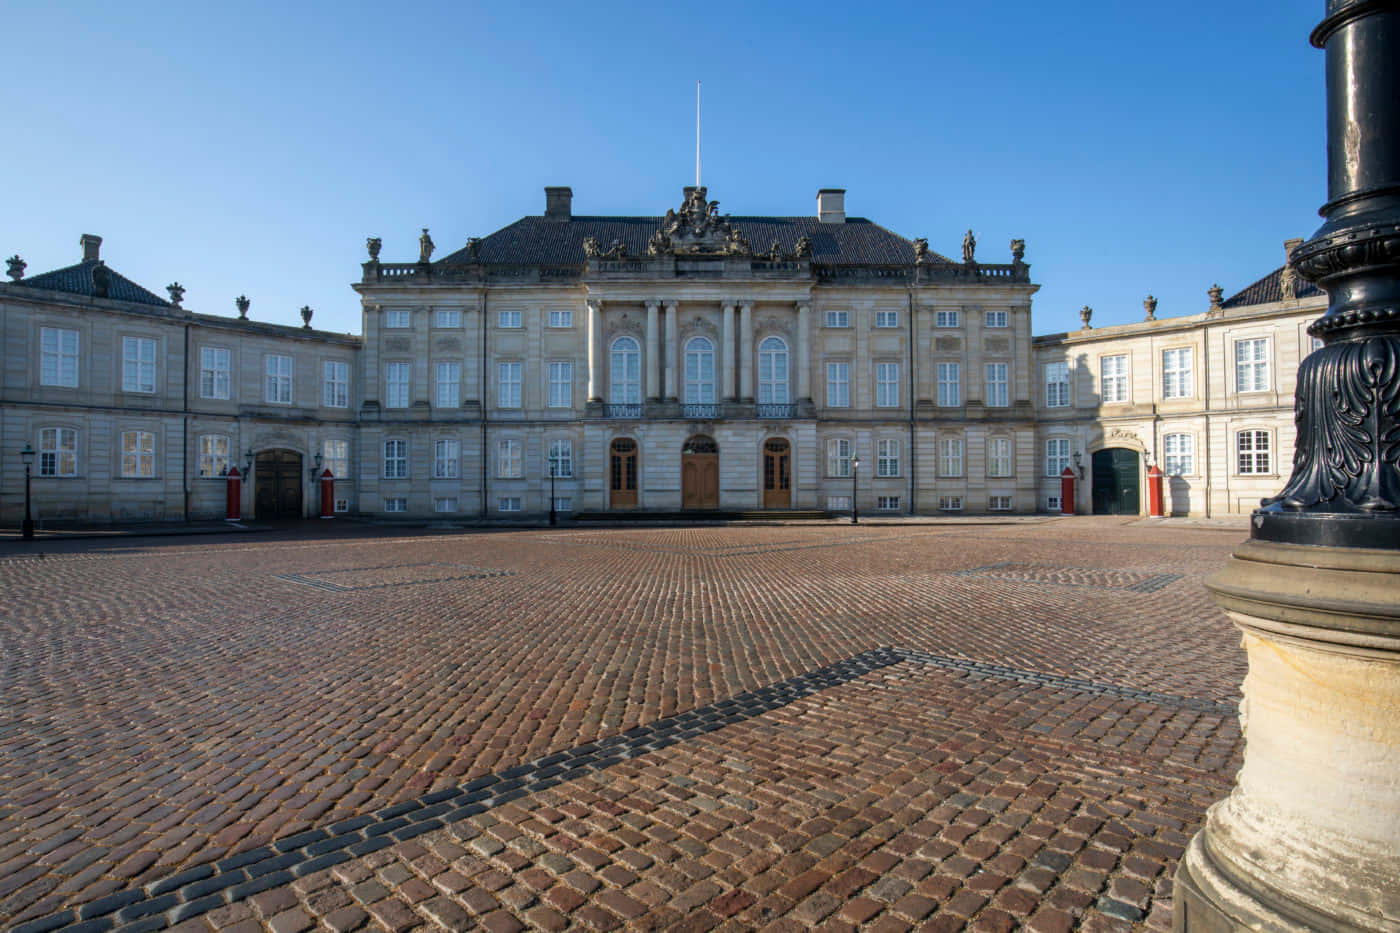 No People In Amalienborg Palace Wallpaper